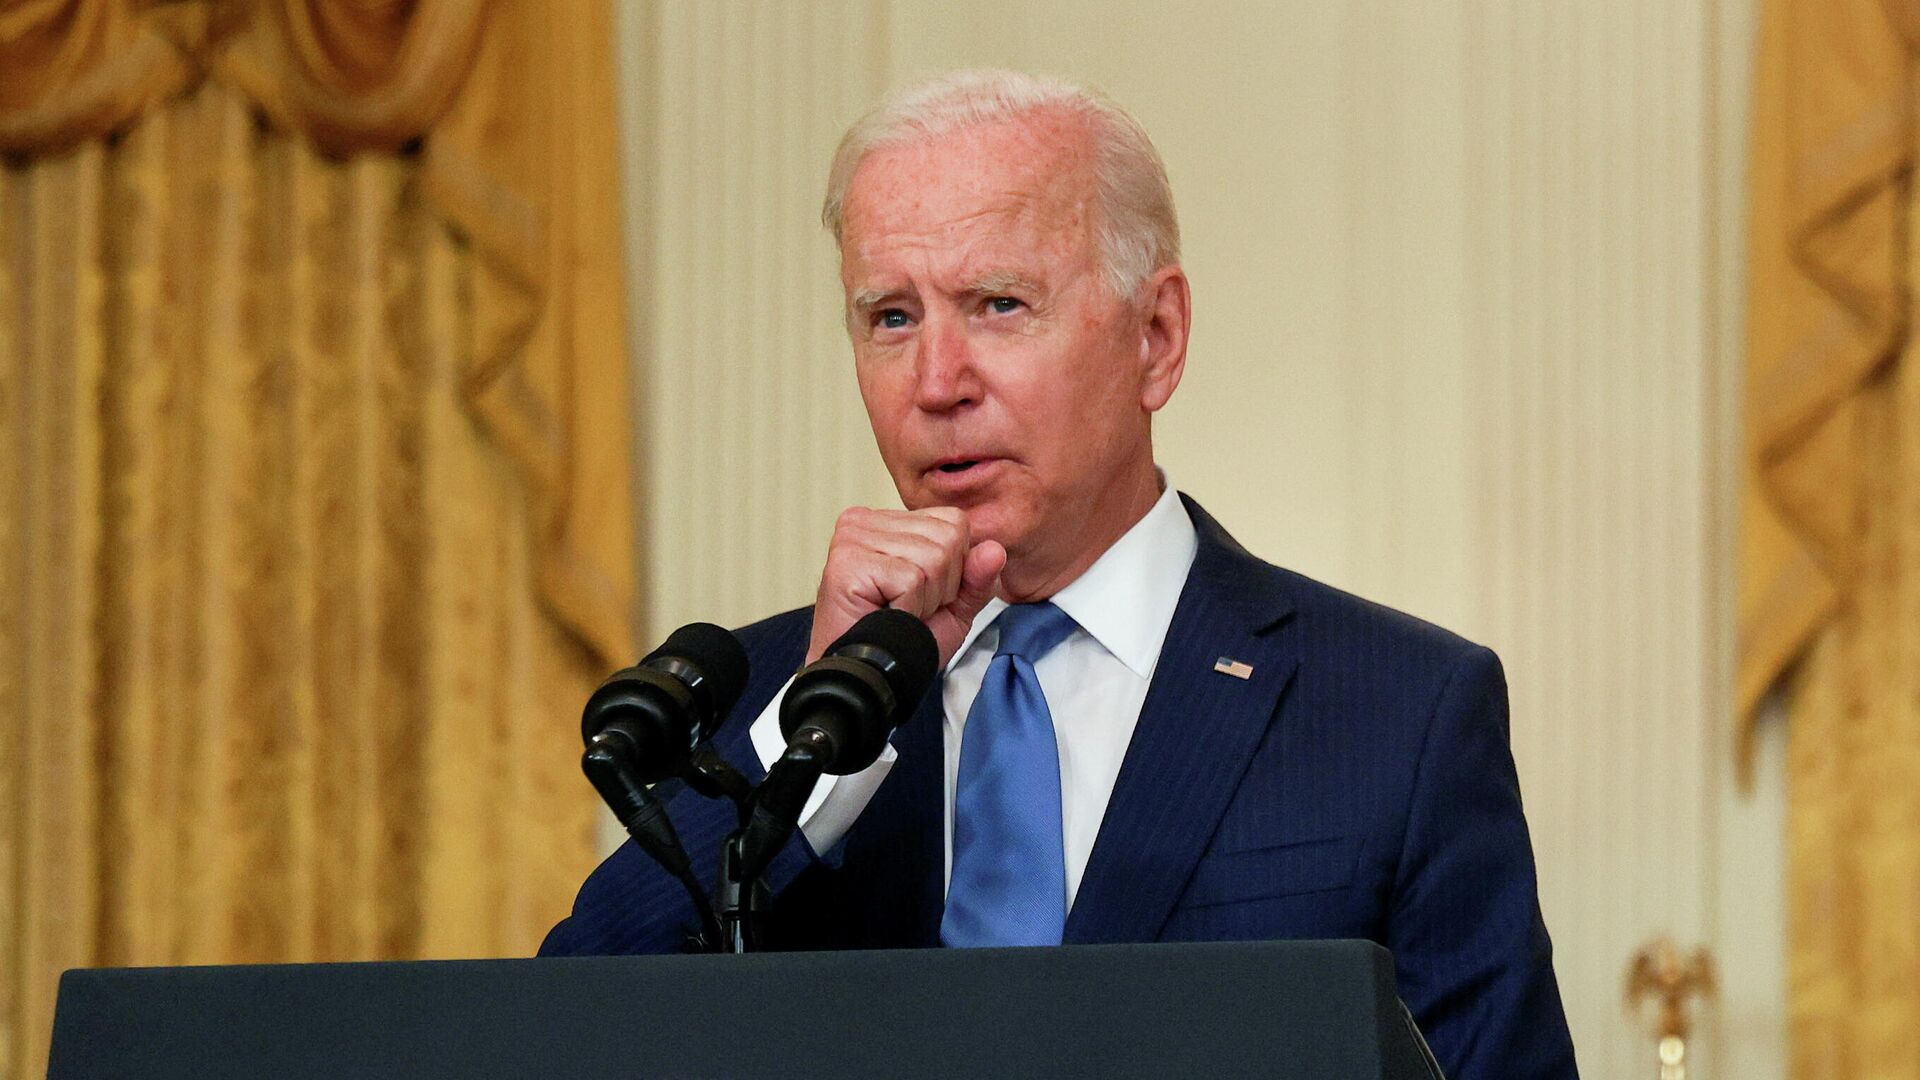 U.S. President Joe Biden clears his throat as he delivers remarks on the economy during a speech in the East Room of the White House in Washington, U.S., September 16, 2021 - Sputnik International, 1920, 17.09.2021